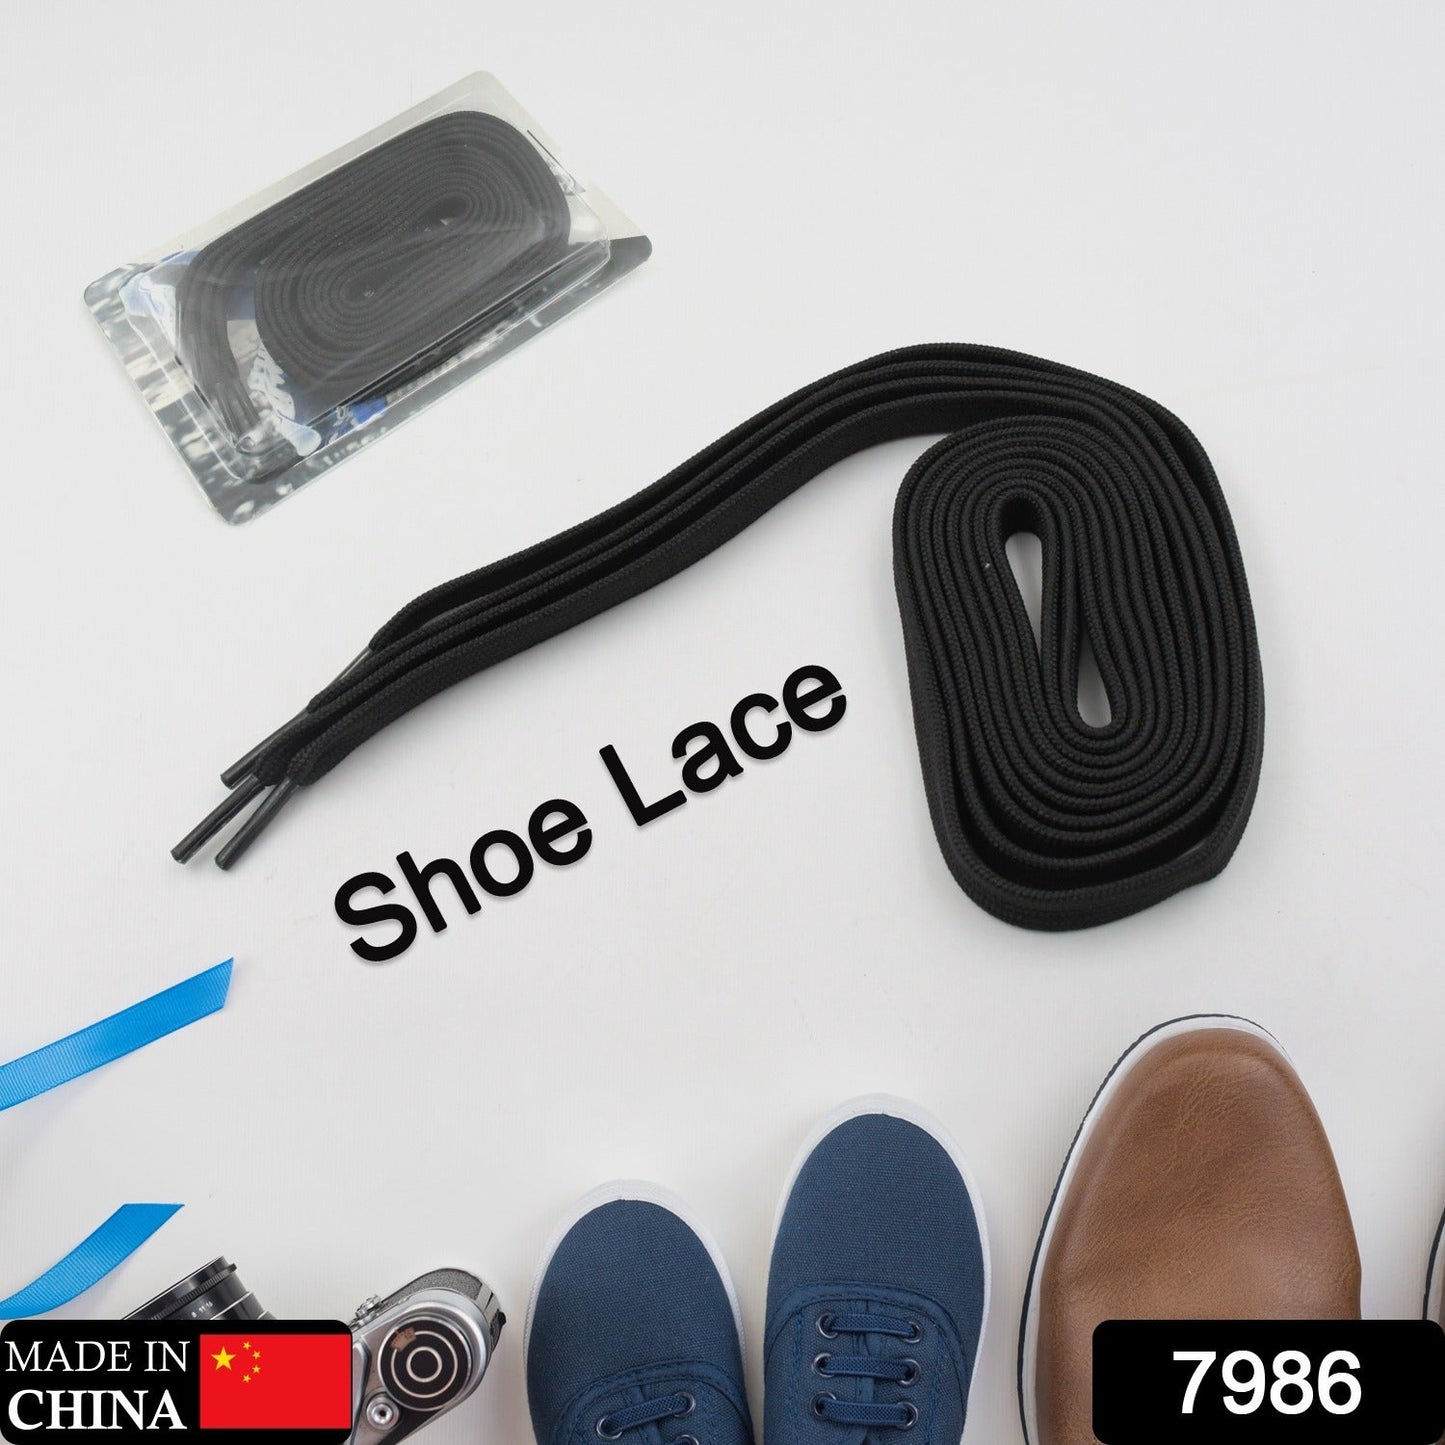 7986 1 Pair Super Quality Flat Shoe laces Sports Shoe Lace for Men & Women running and gym shoelace Flat Sneaker Shoelace Athletic shoe strings for Boots/Sneaker/Work Shoes (1 Pair)